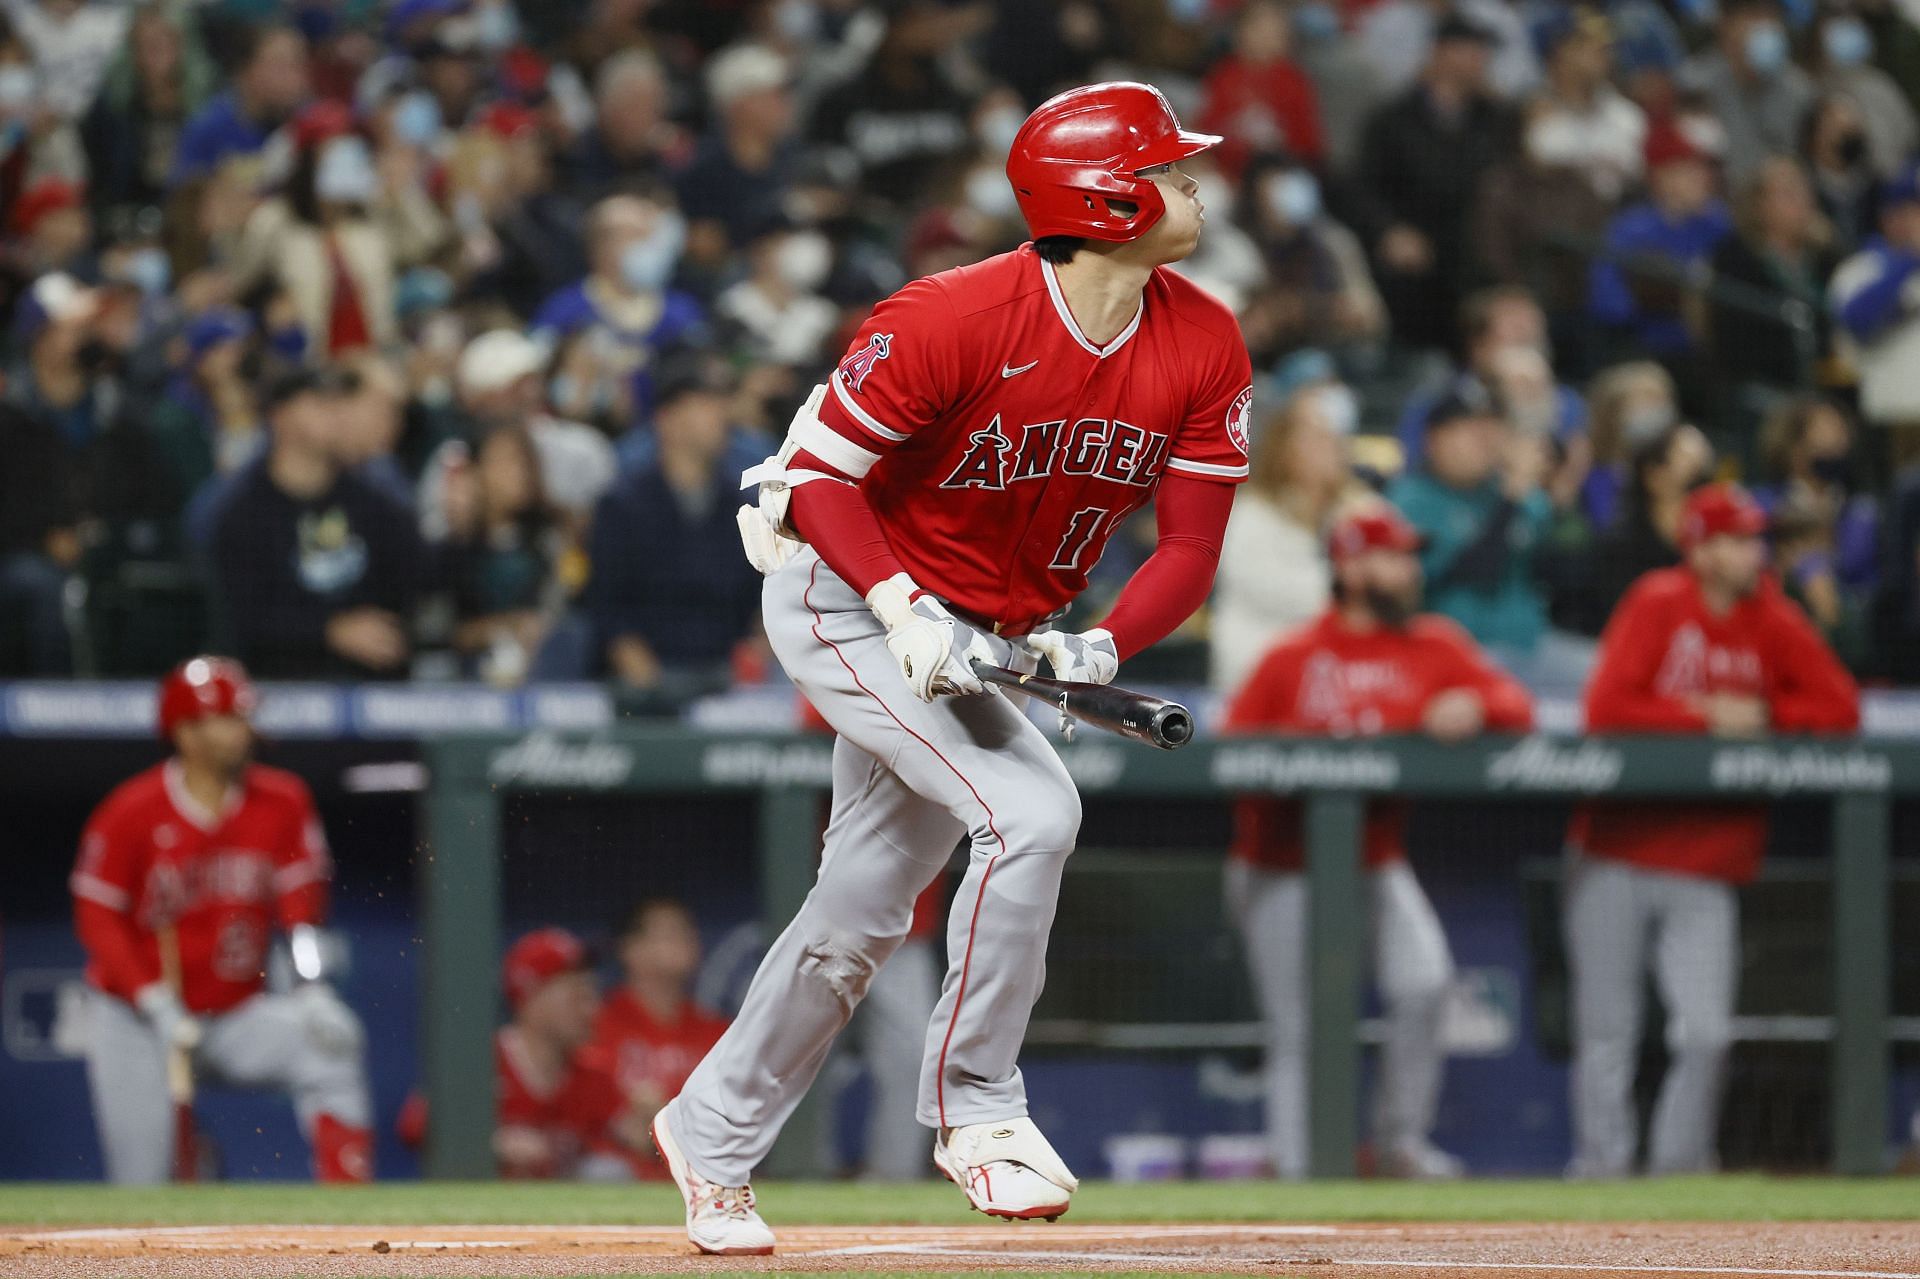 Shohei Ohtani makes contact with a pitch during a Los Angeles Angels v Seattle Mariners game